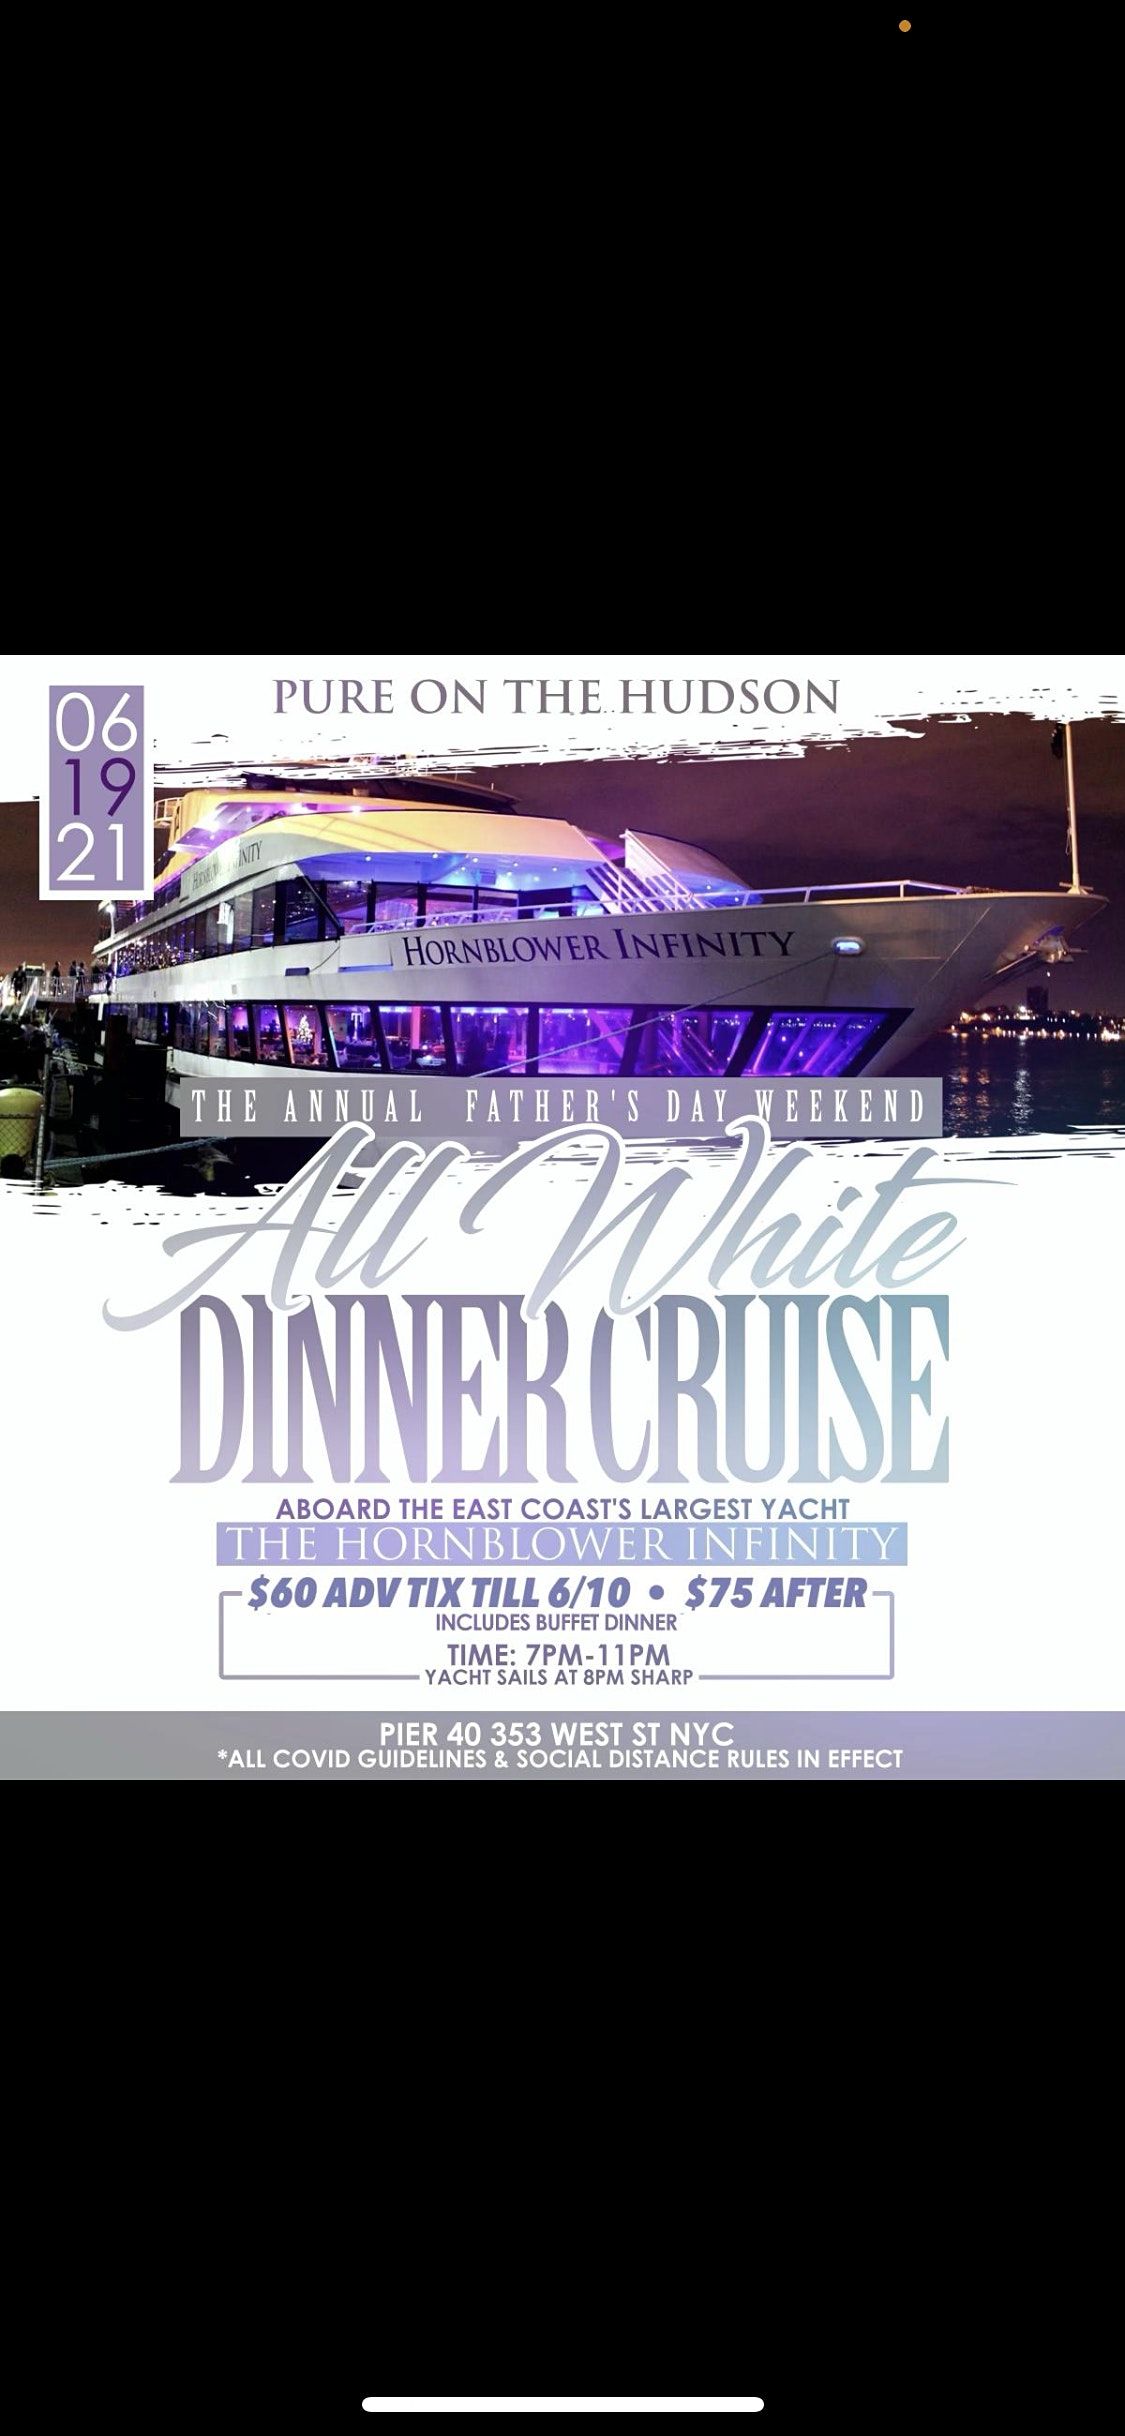 PURE ON THE HUDSON